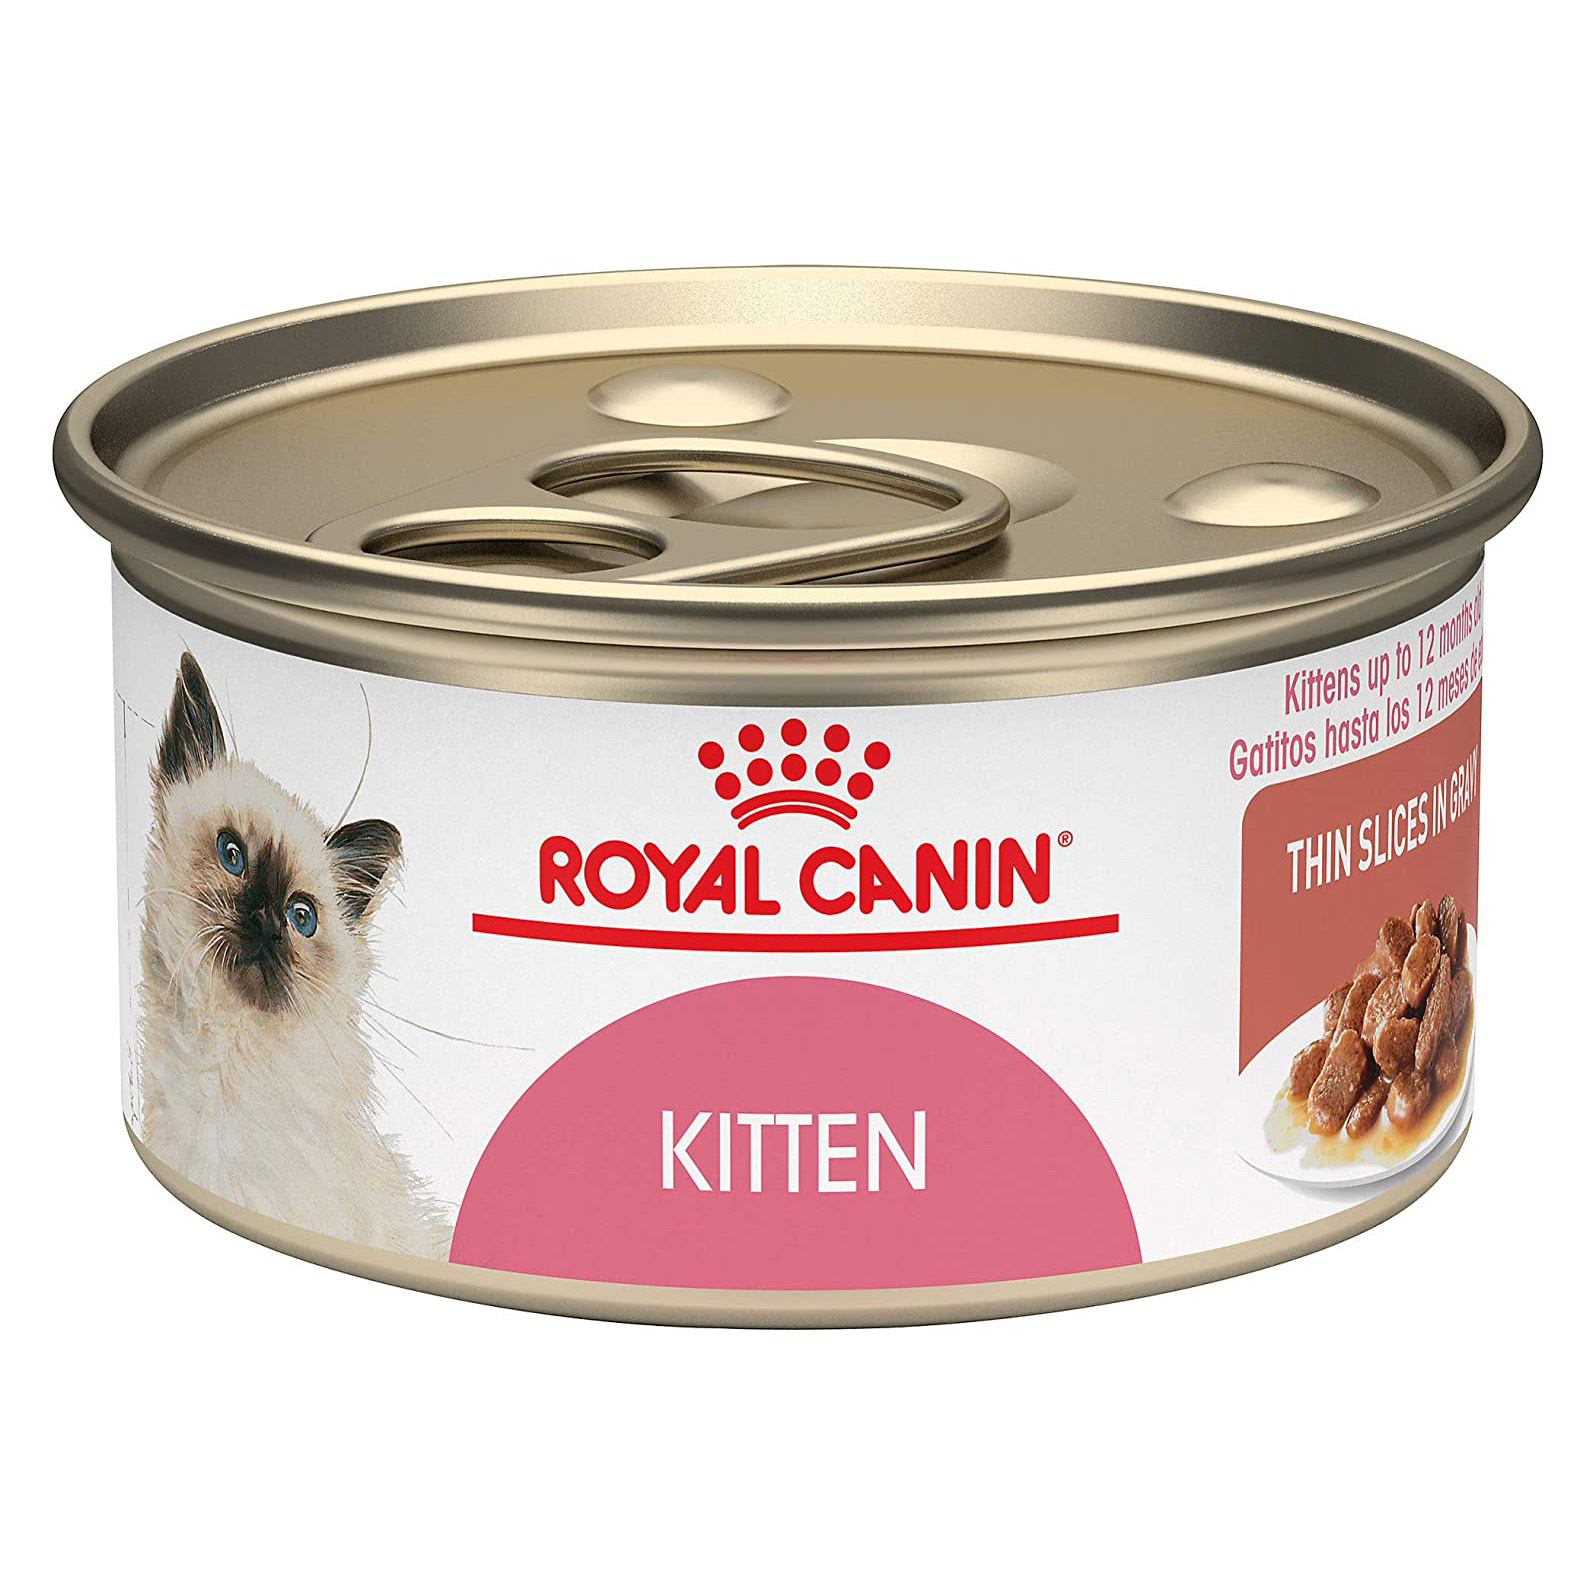 Royal Canin Kitten Thin Slices in Gravy, Canned Cat Food, 3 oz Alsip